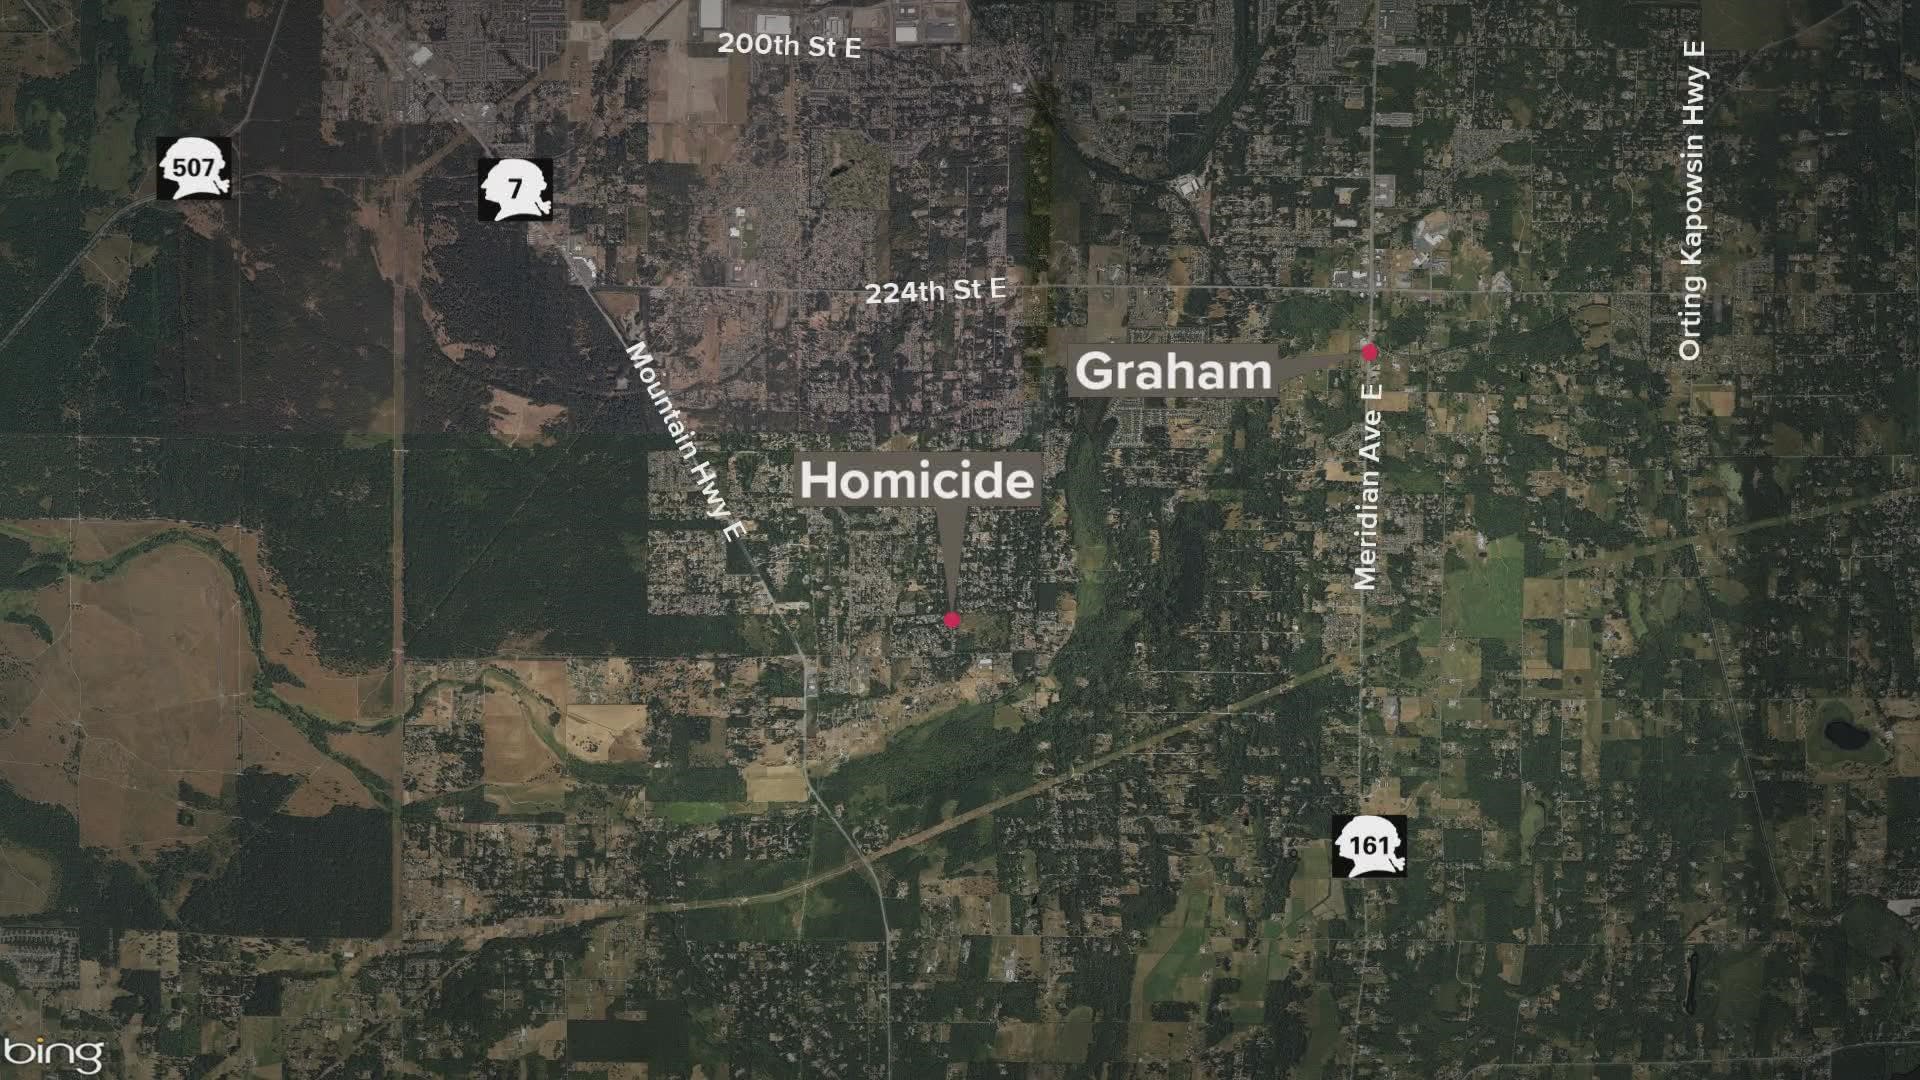 A reported shootout between two men led to the death of one in Graham, and police continue their search for the suspect.